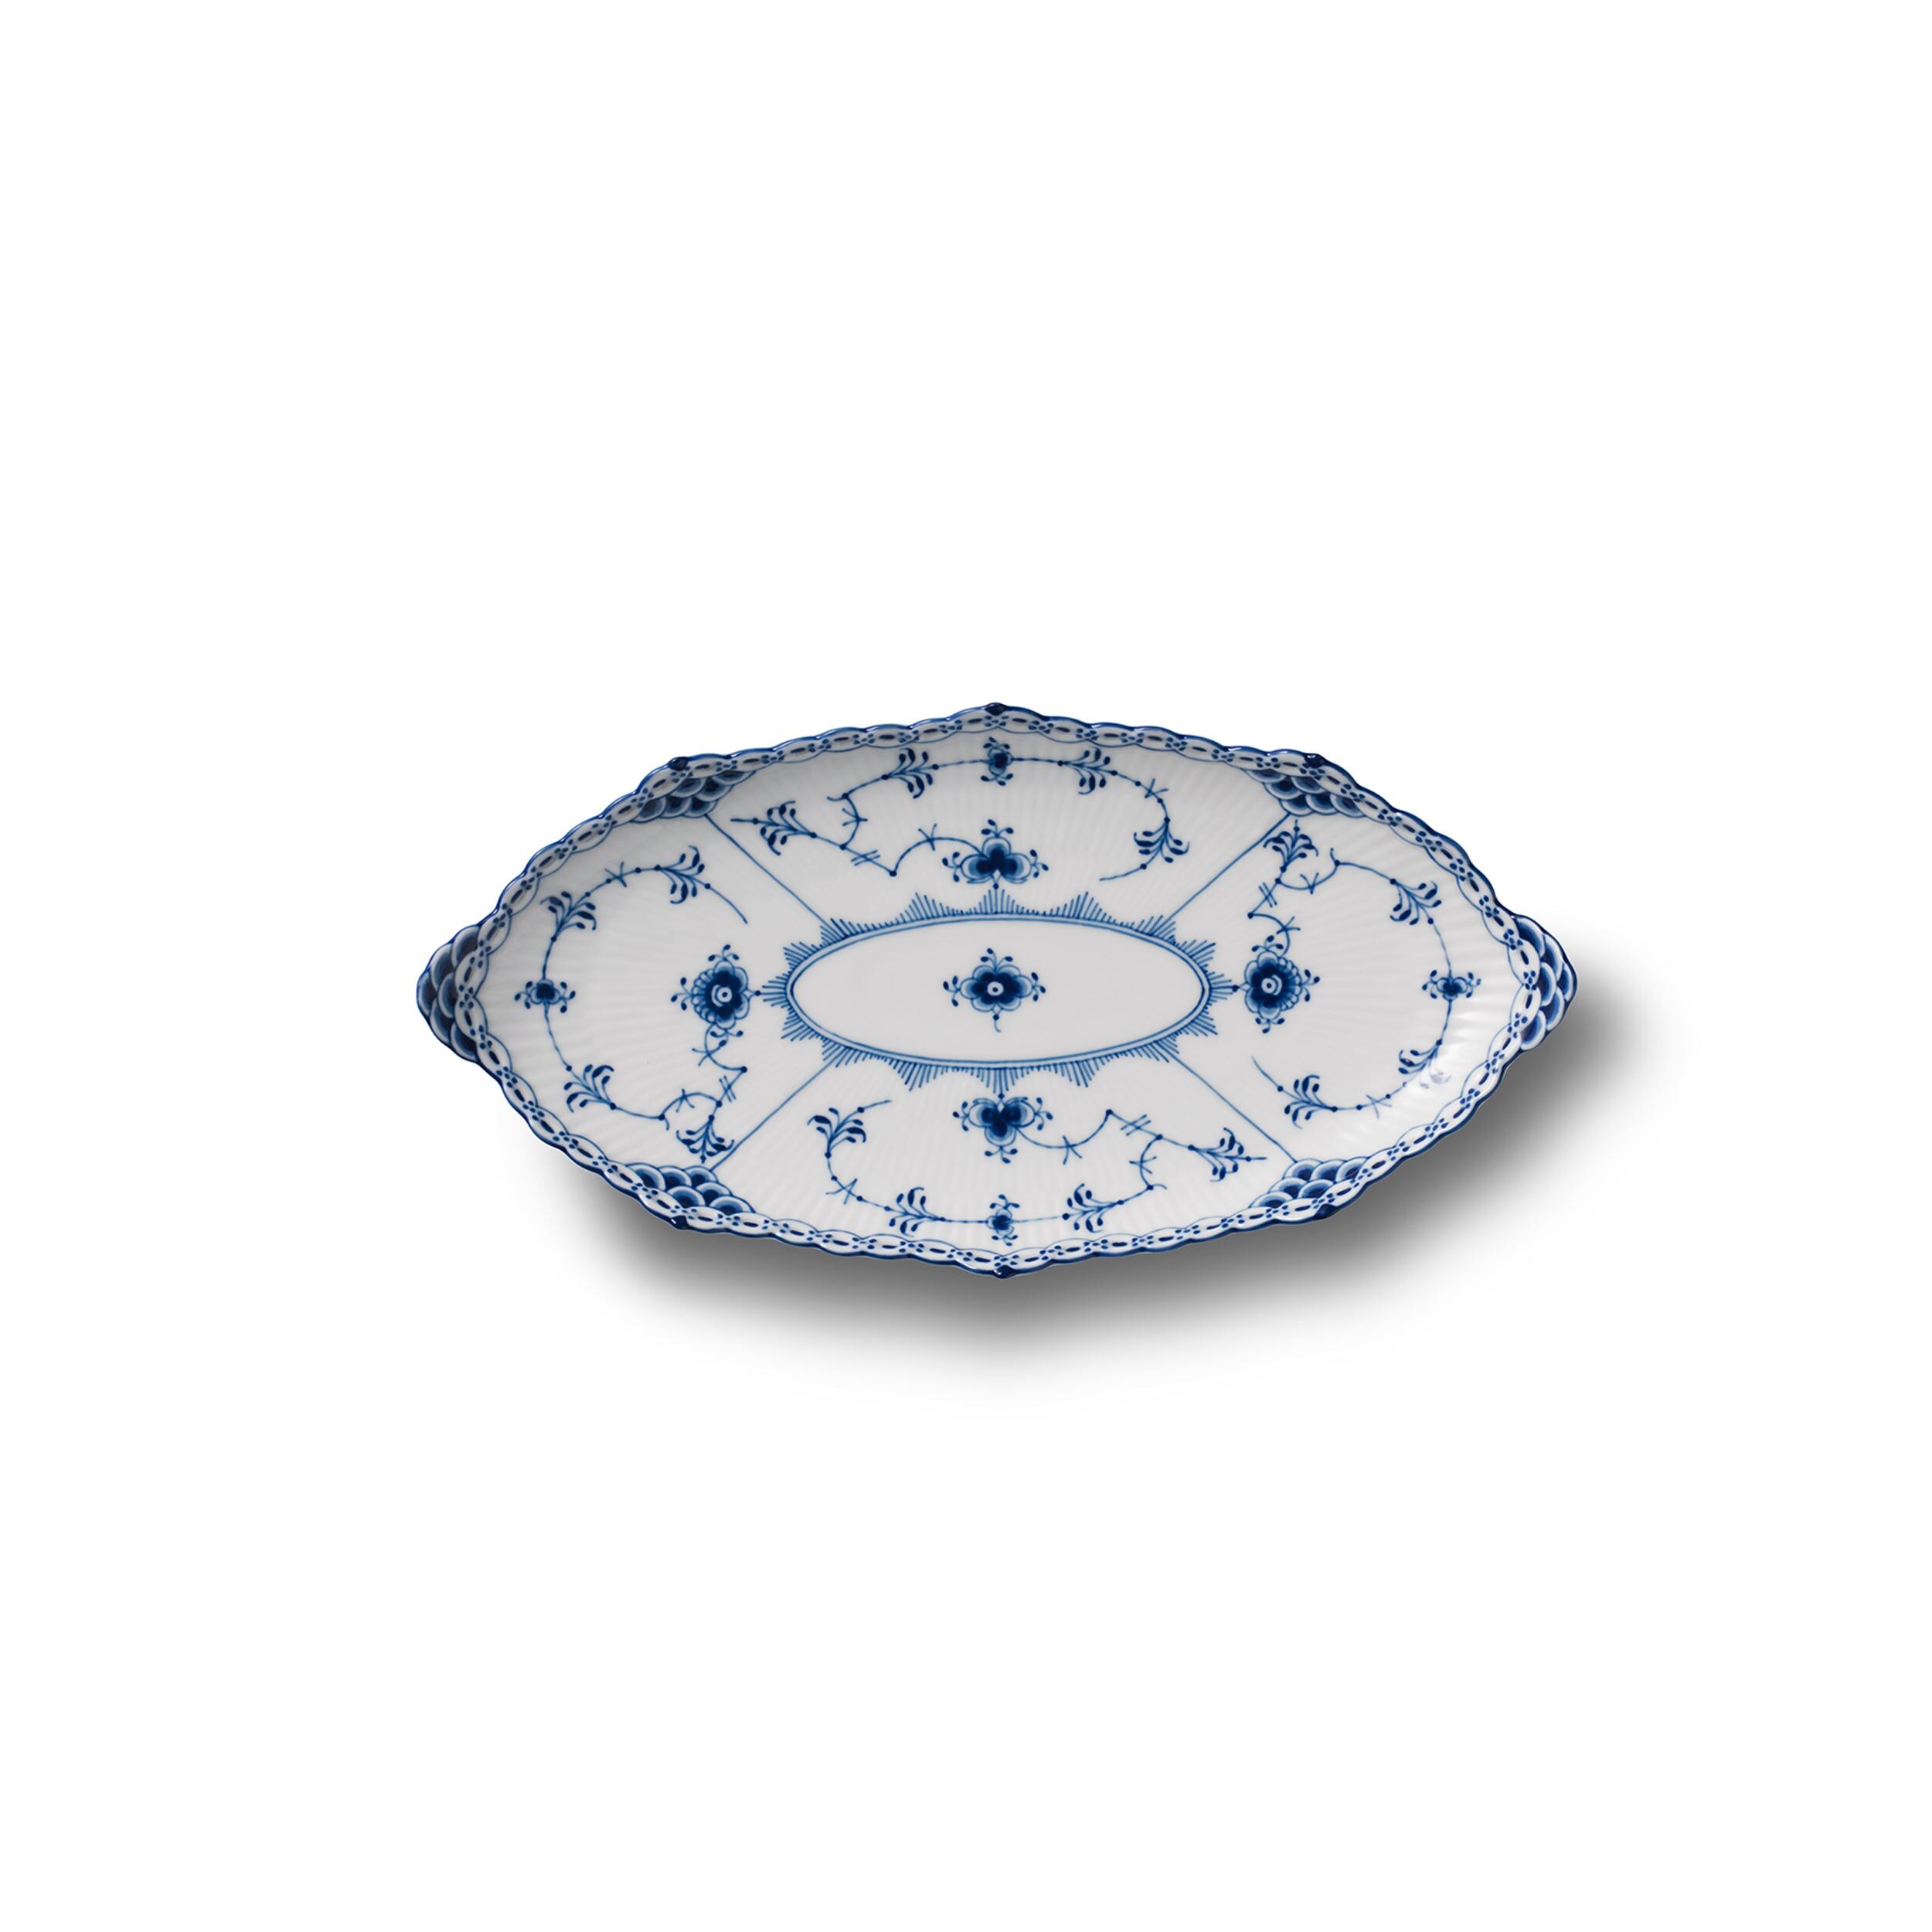  Royal Copenhagen 1016759 Blue Fluted Plain Oval Dish Plate, 9.3  inches (23.5 cm), Wedding Gift : Home & Kitchen